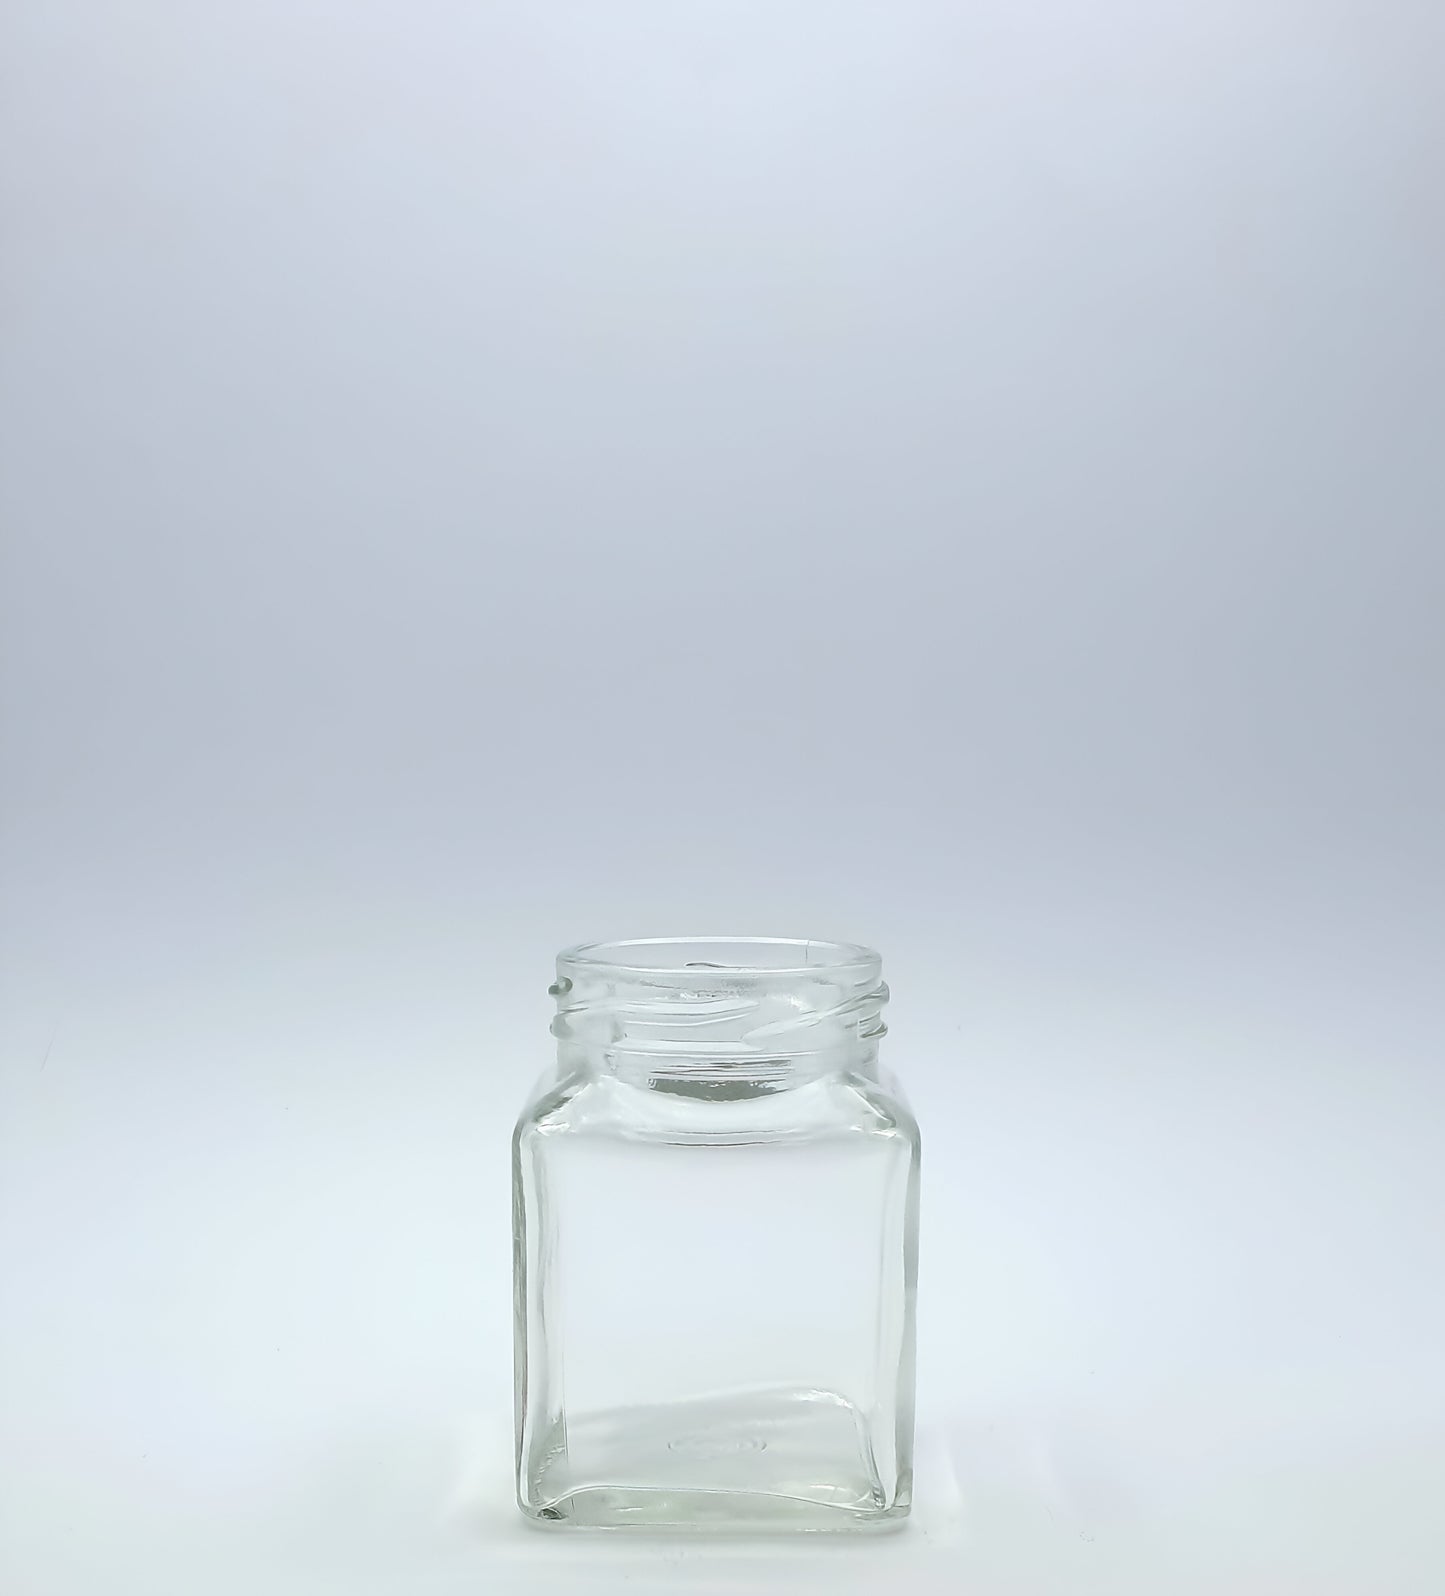 110 (150gm) Glass Square Clear Jar without a cap